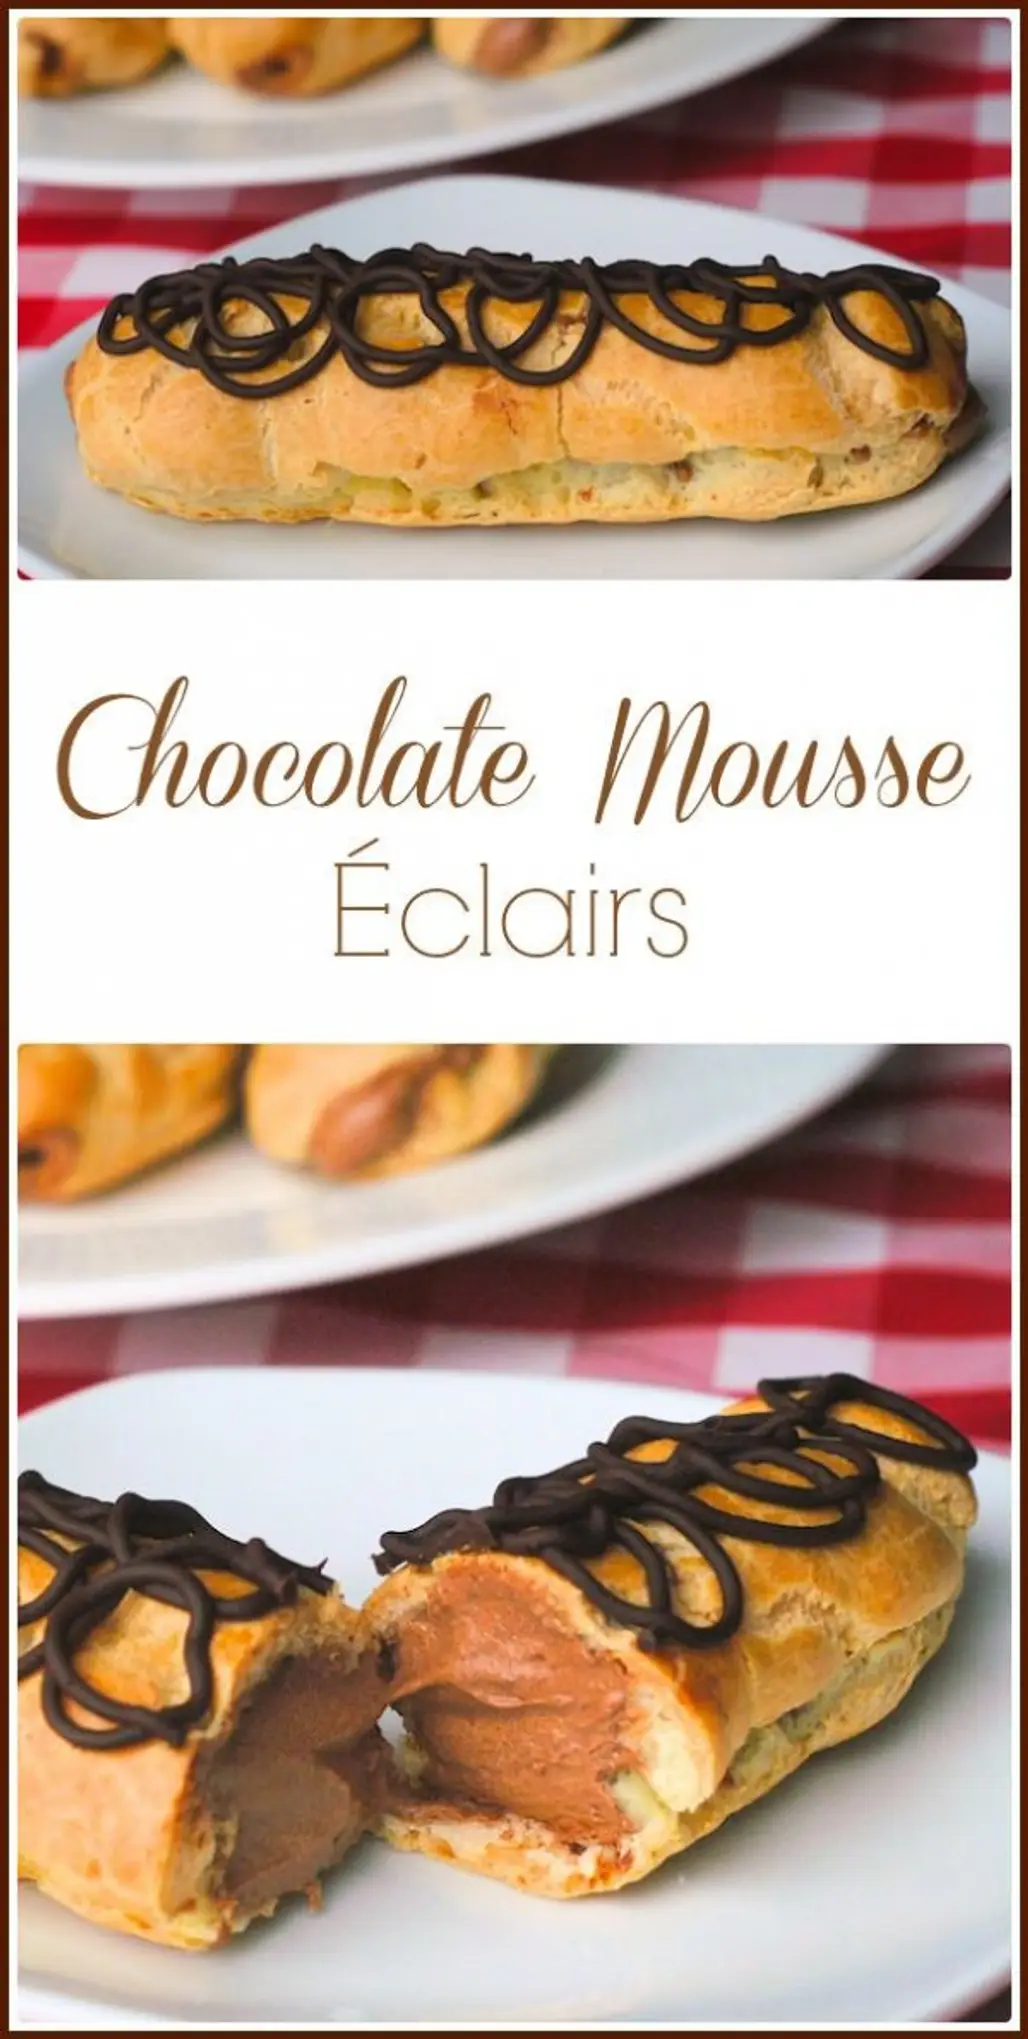 Chocolate Mousse Eclairs